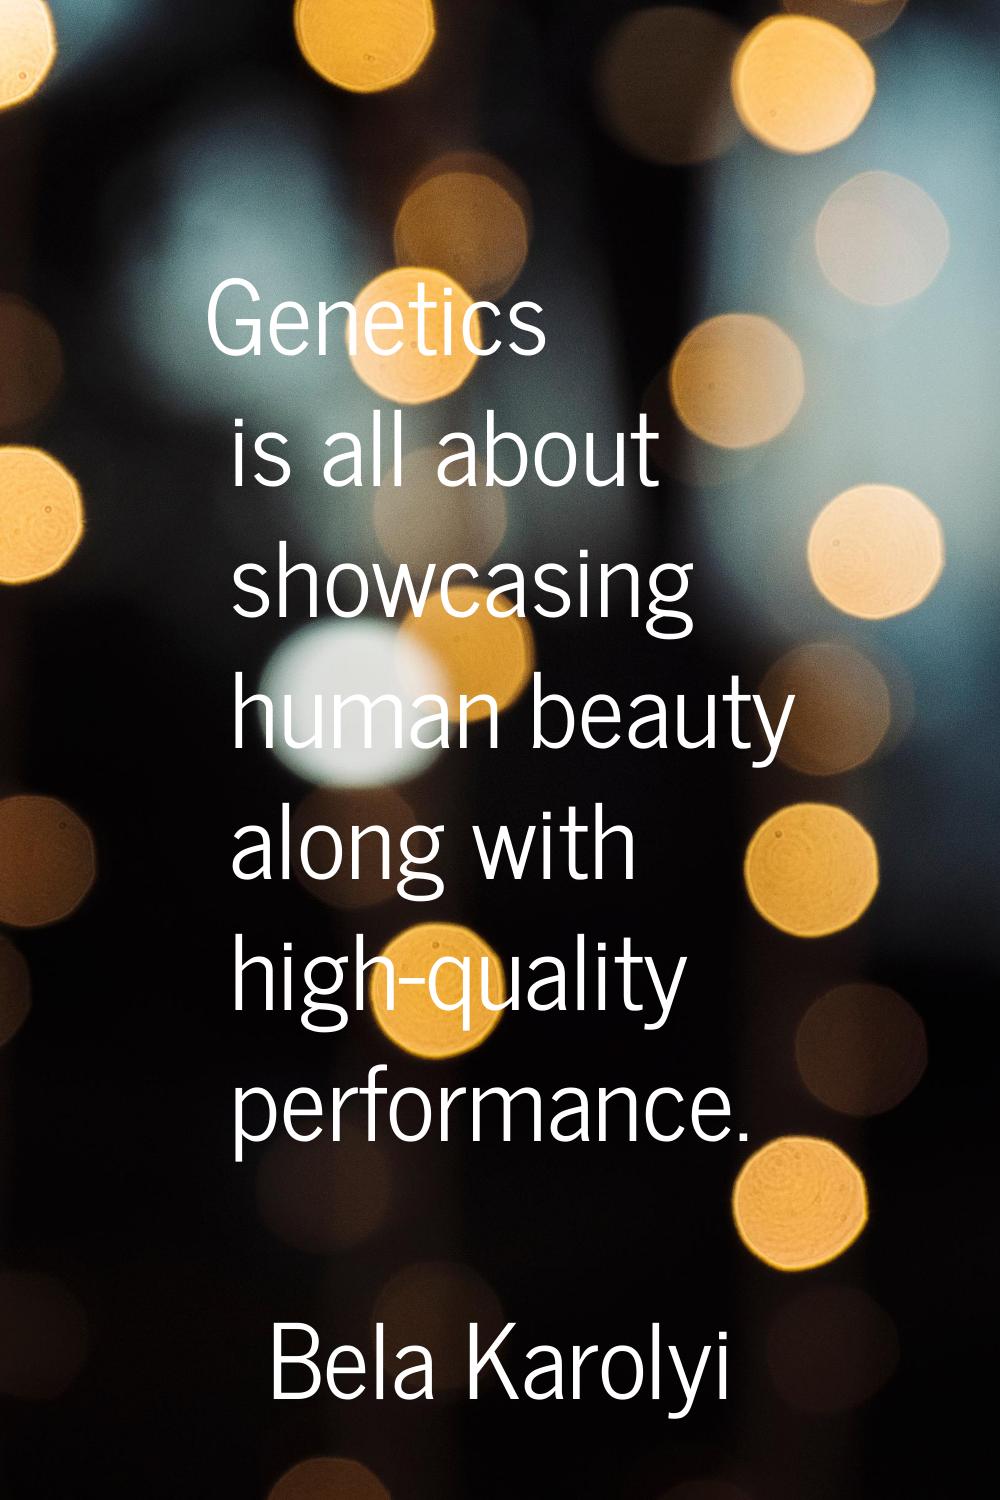 Genetics is all about showcasing human beauty along with high-quality performance.